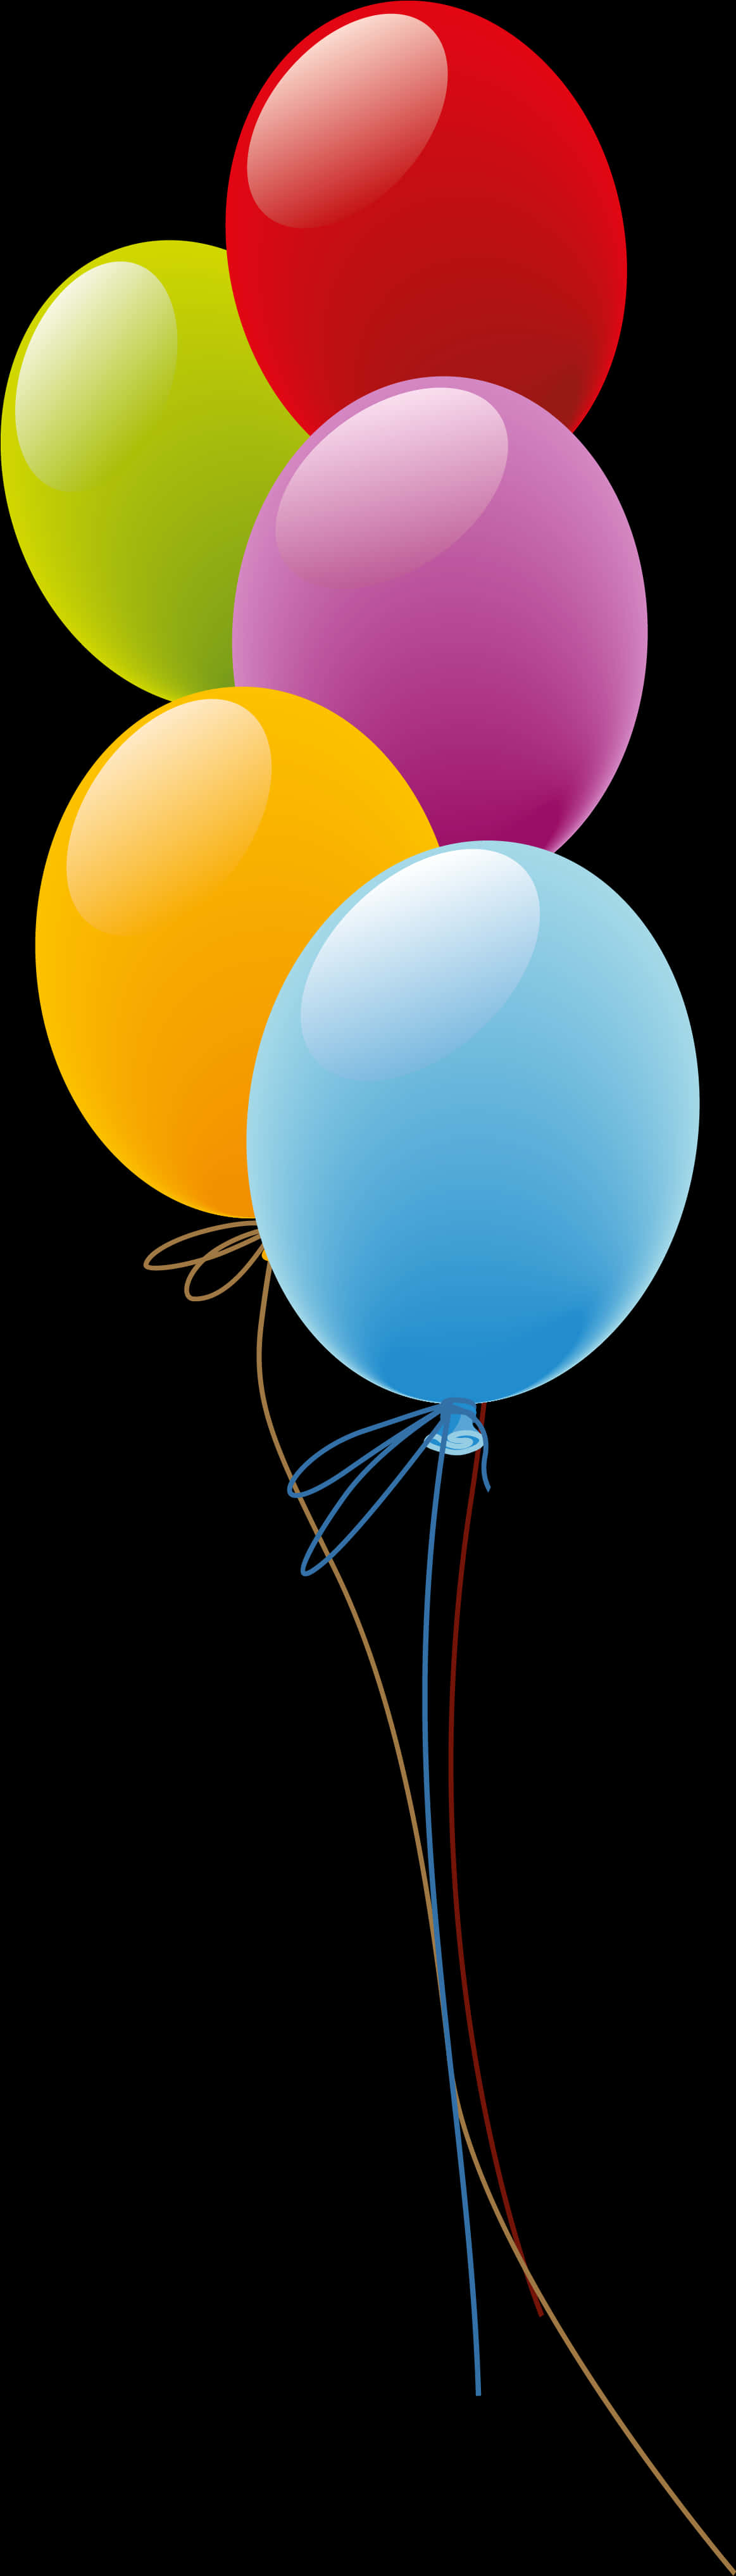 Colorful Balloons Against Black Background PNG image